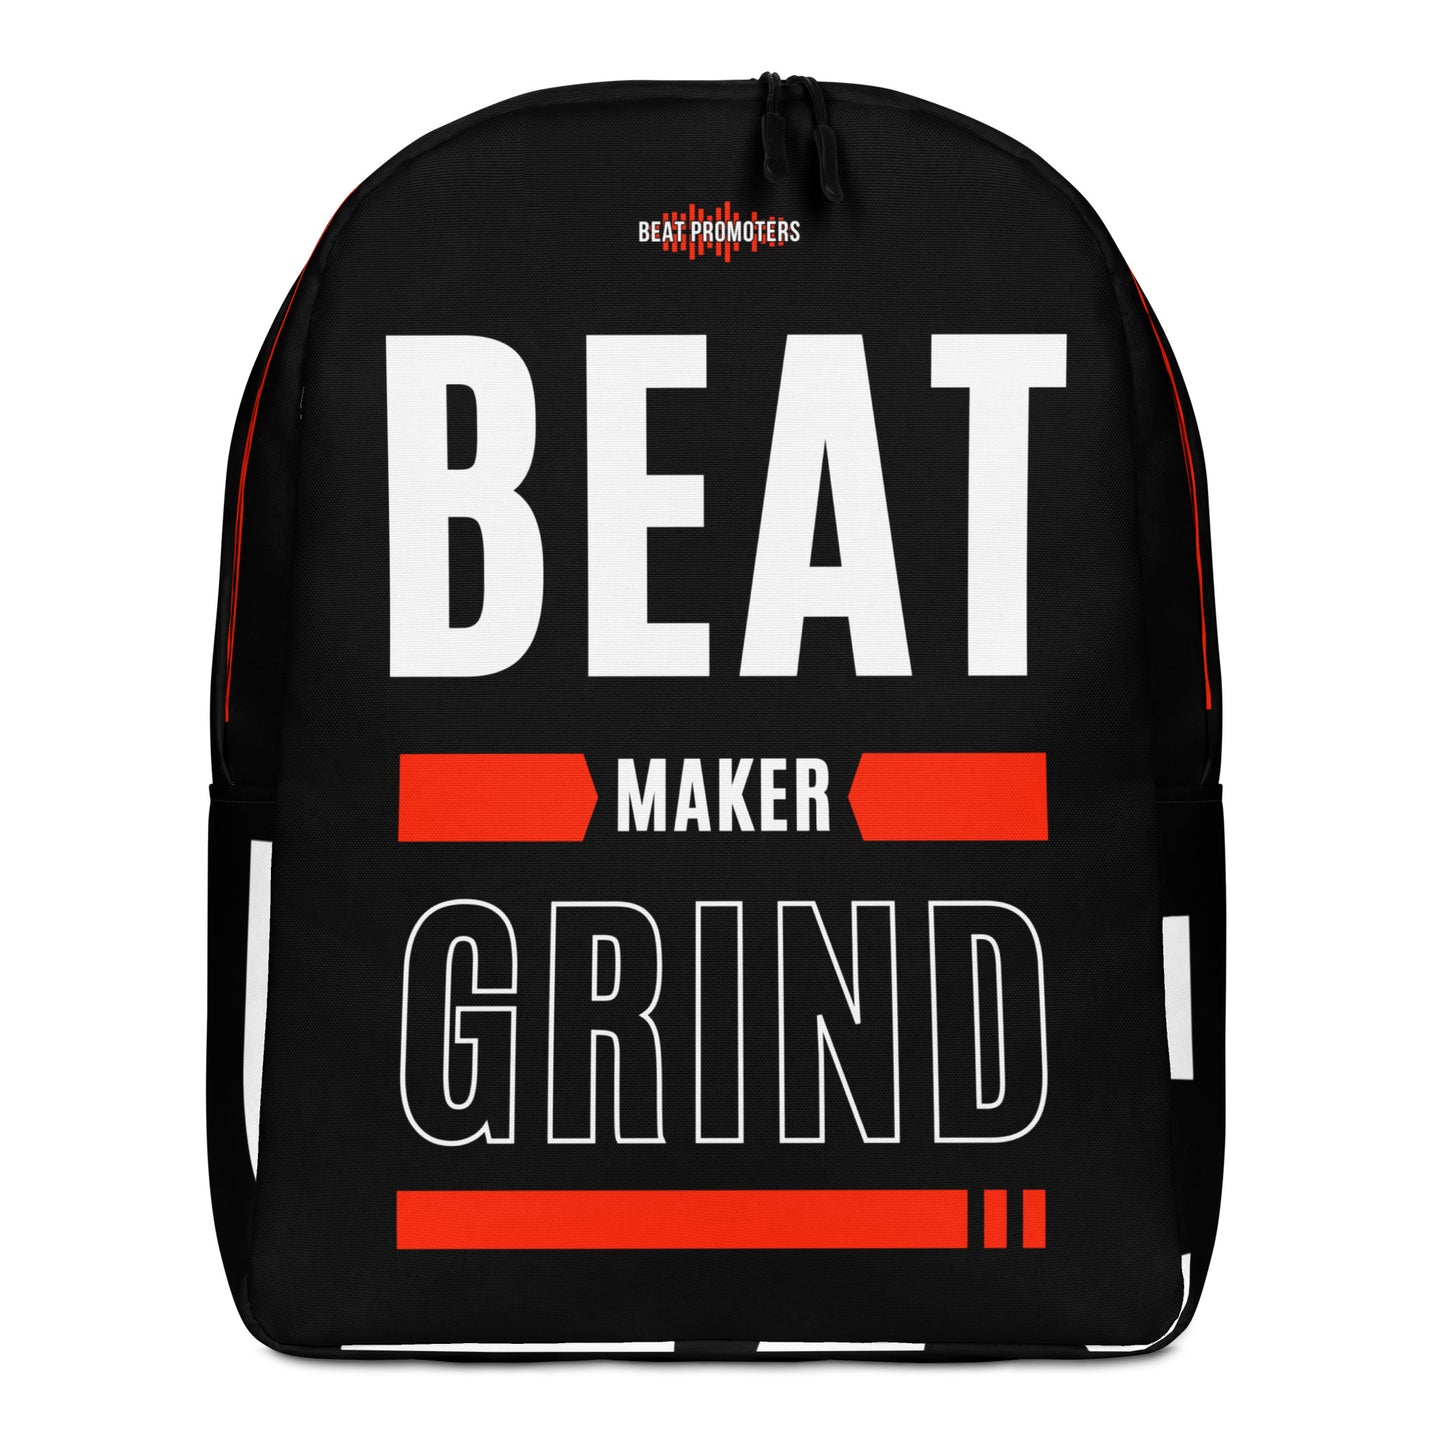 Beatmaker Laptop / Drum Machine and Accessories Backpack - Black